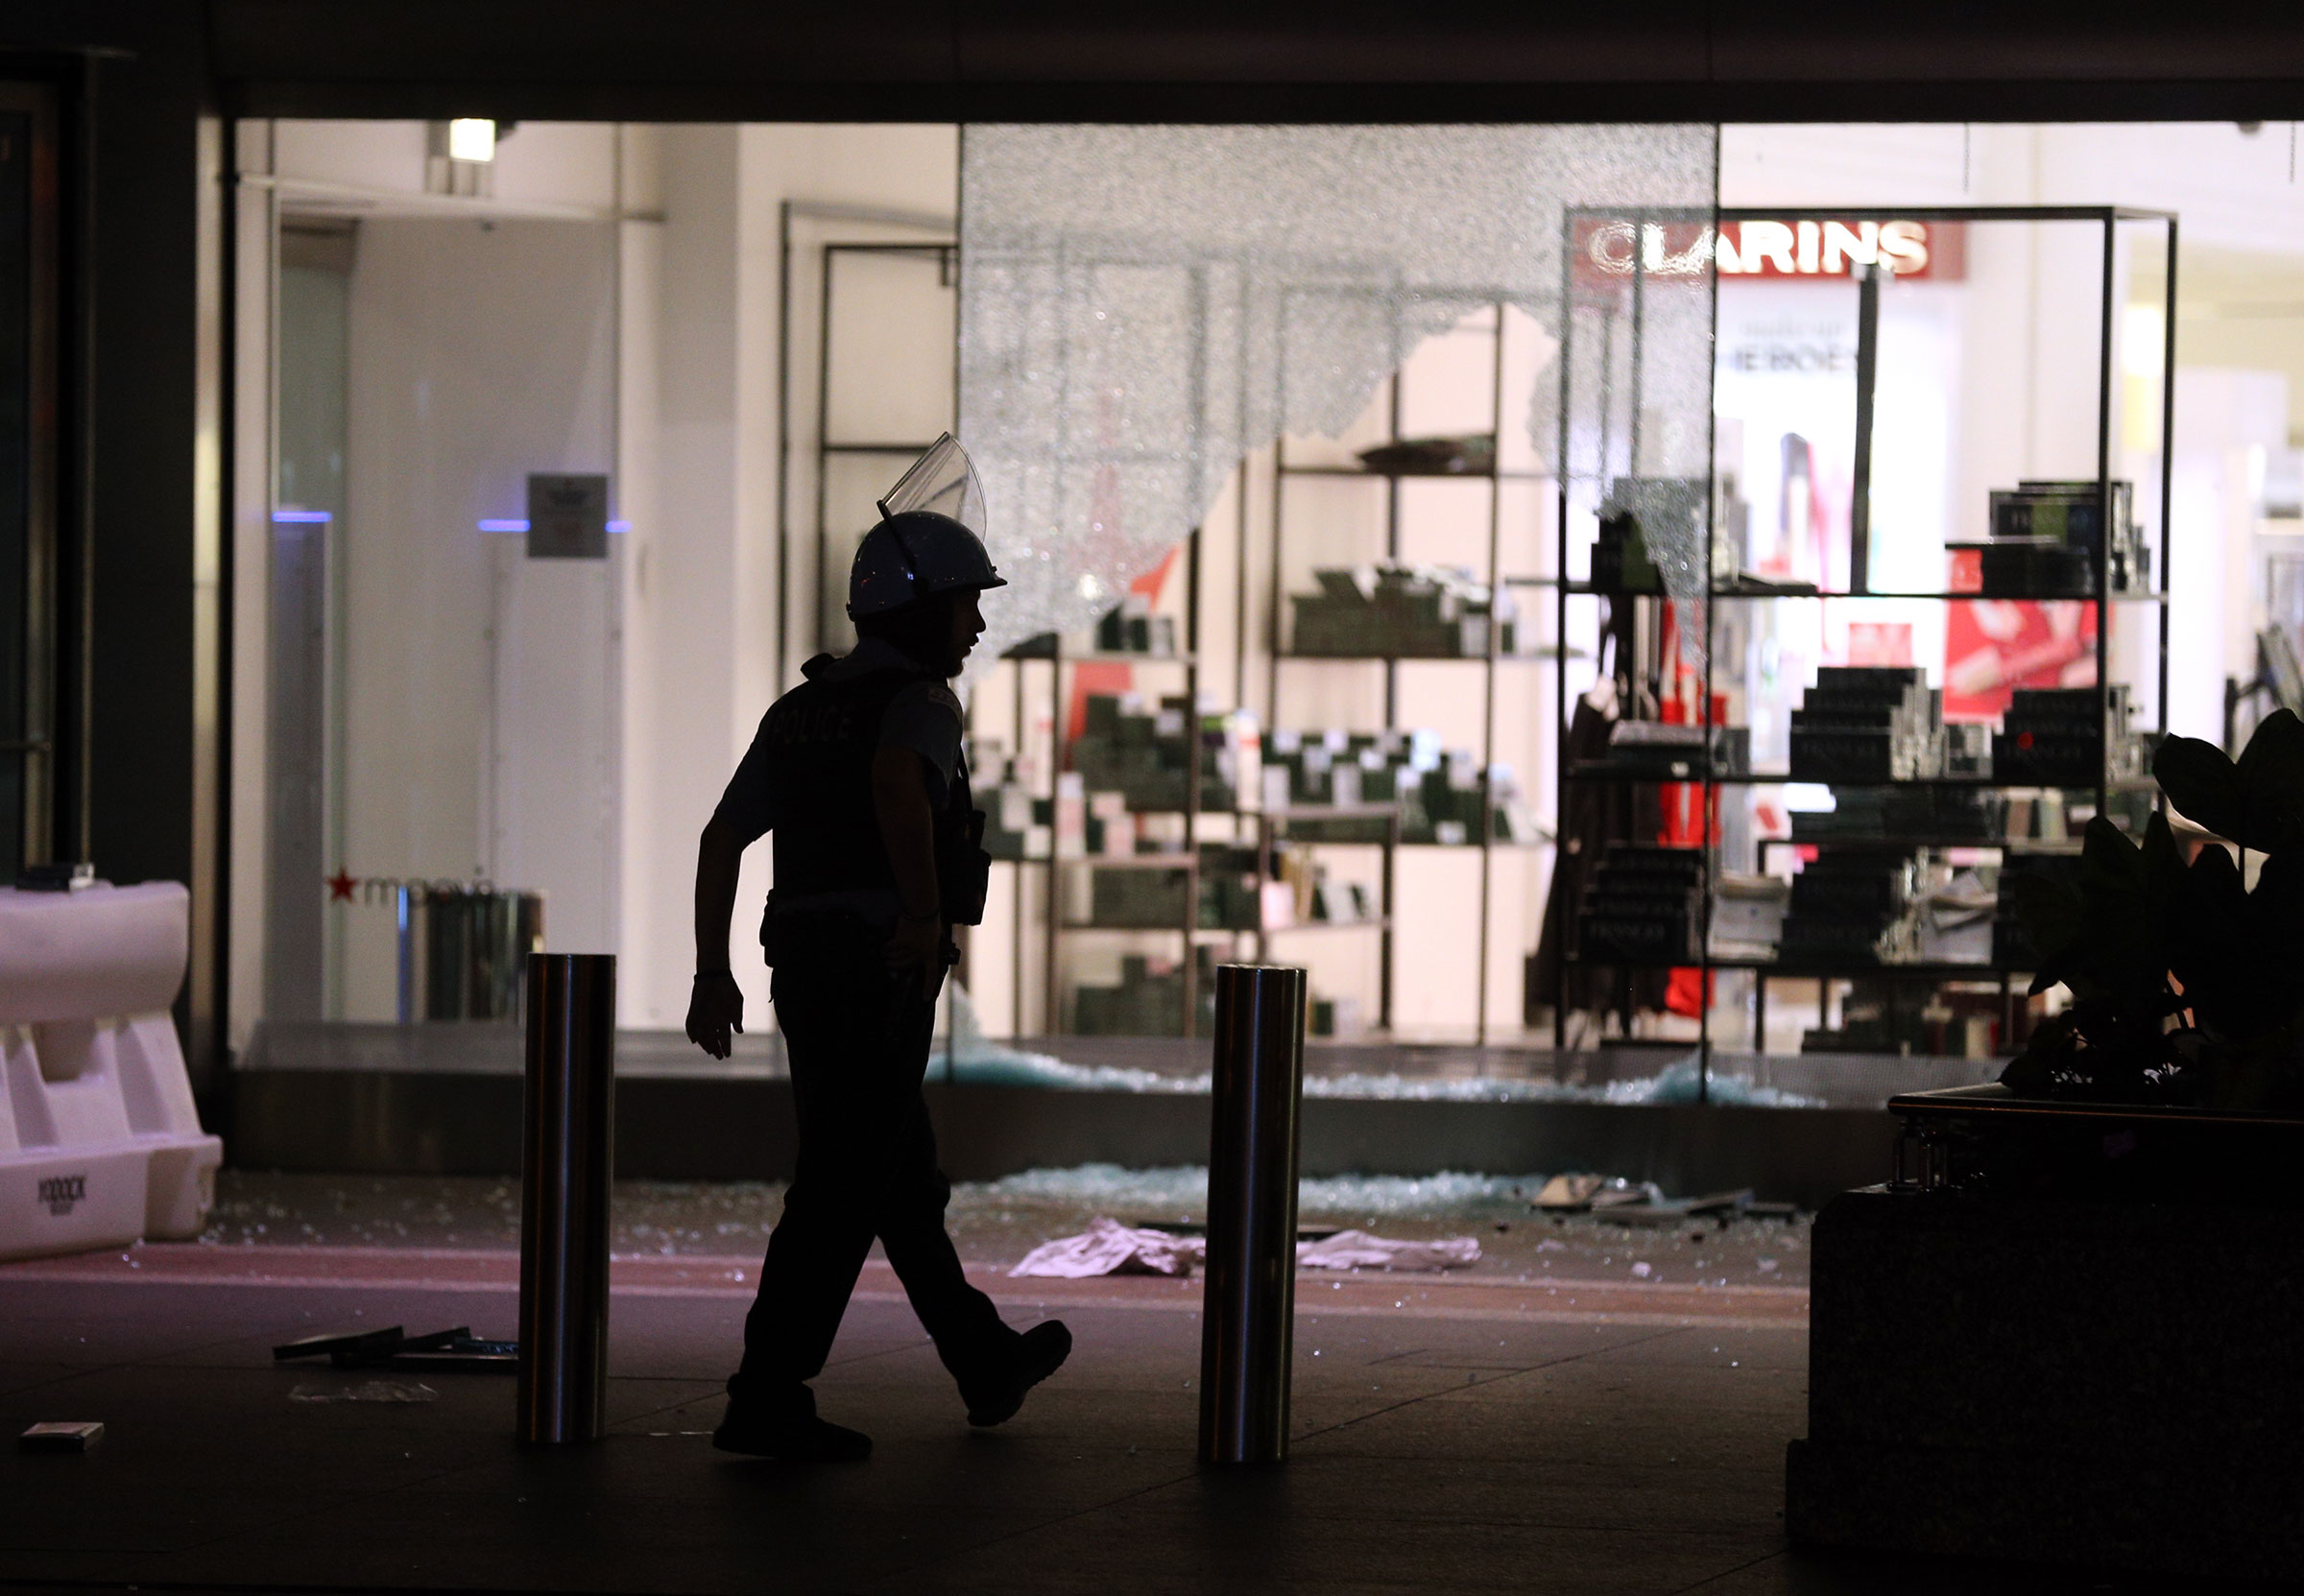 A Chicago Police officer walks past Macy's on North Michigan Avenue in Chicago after the store and others in the area were looted